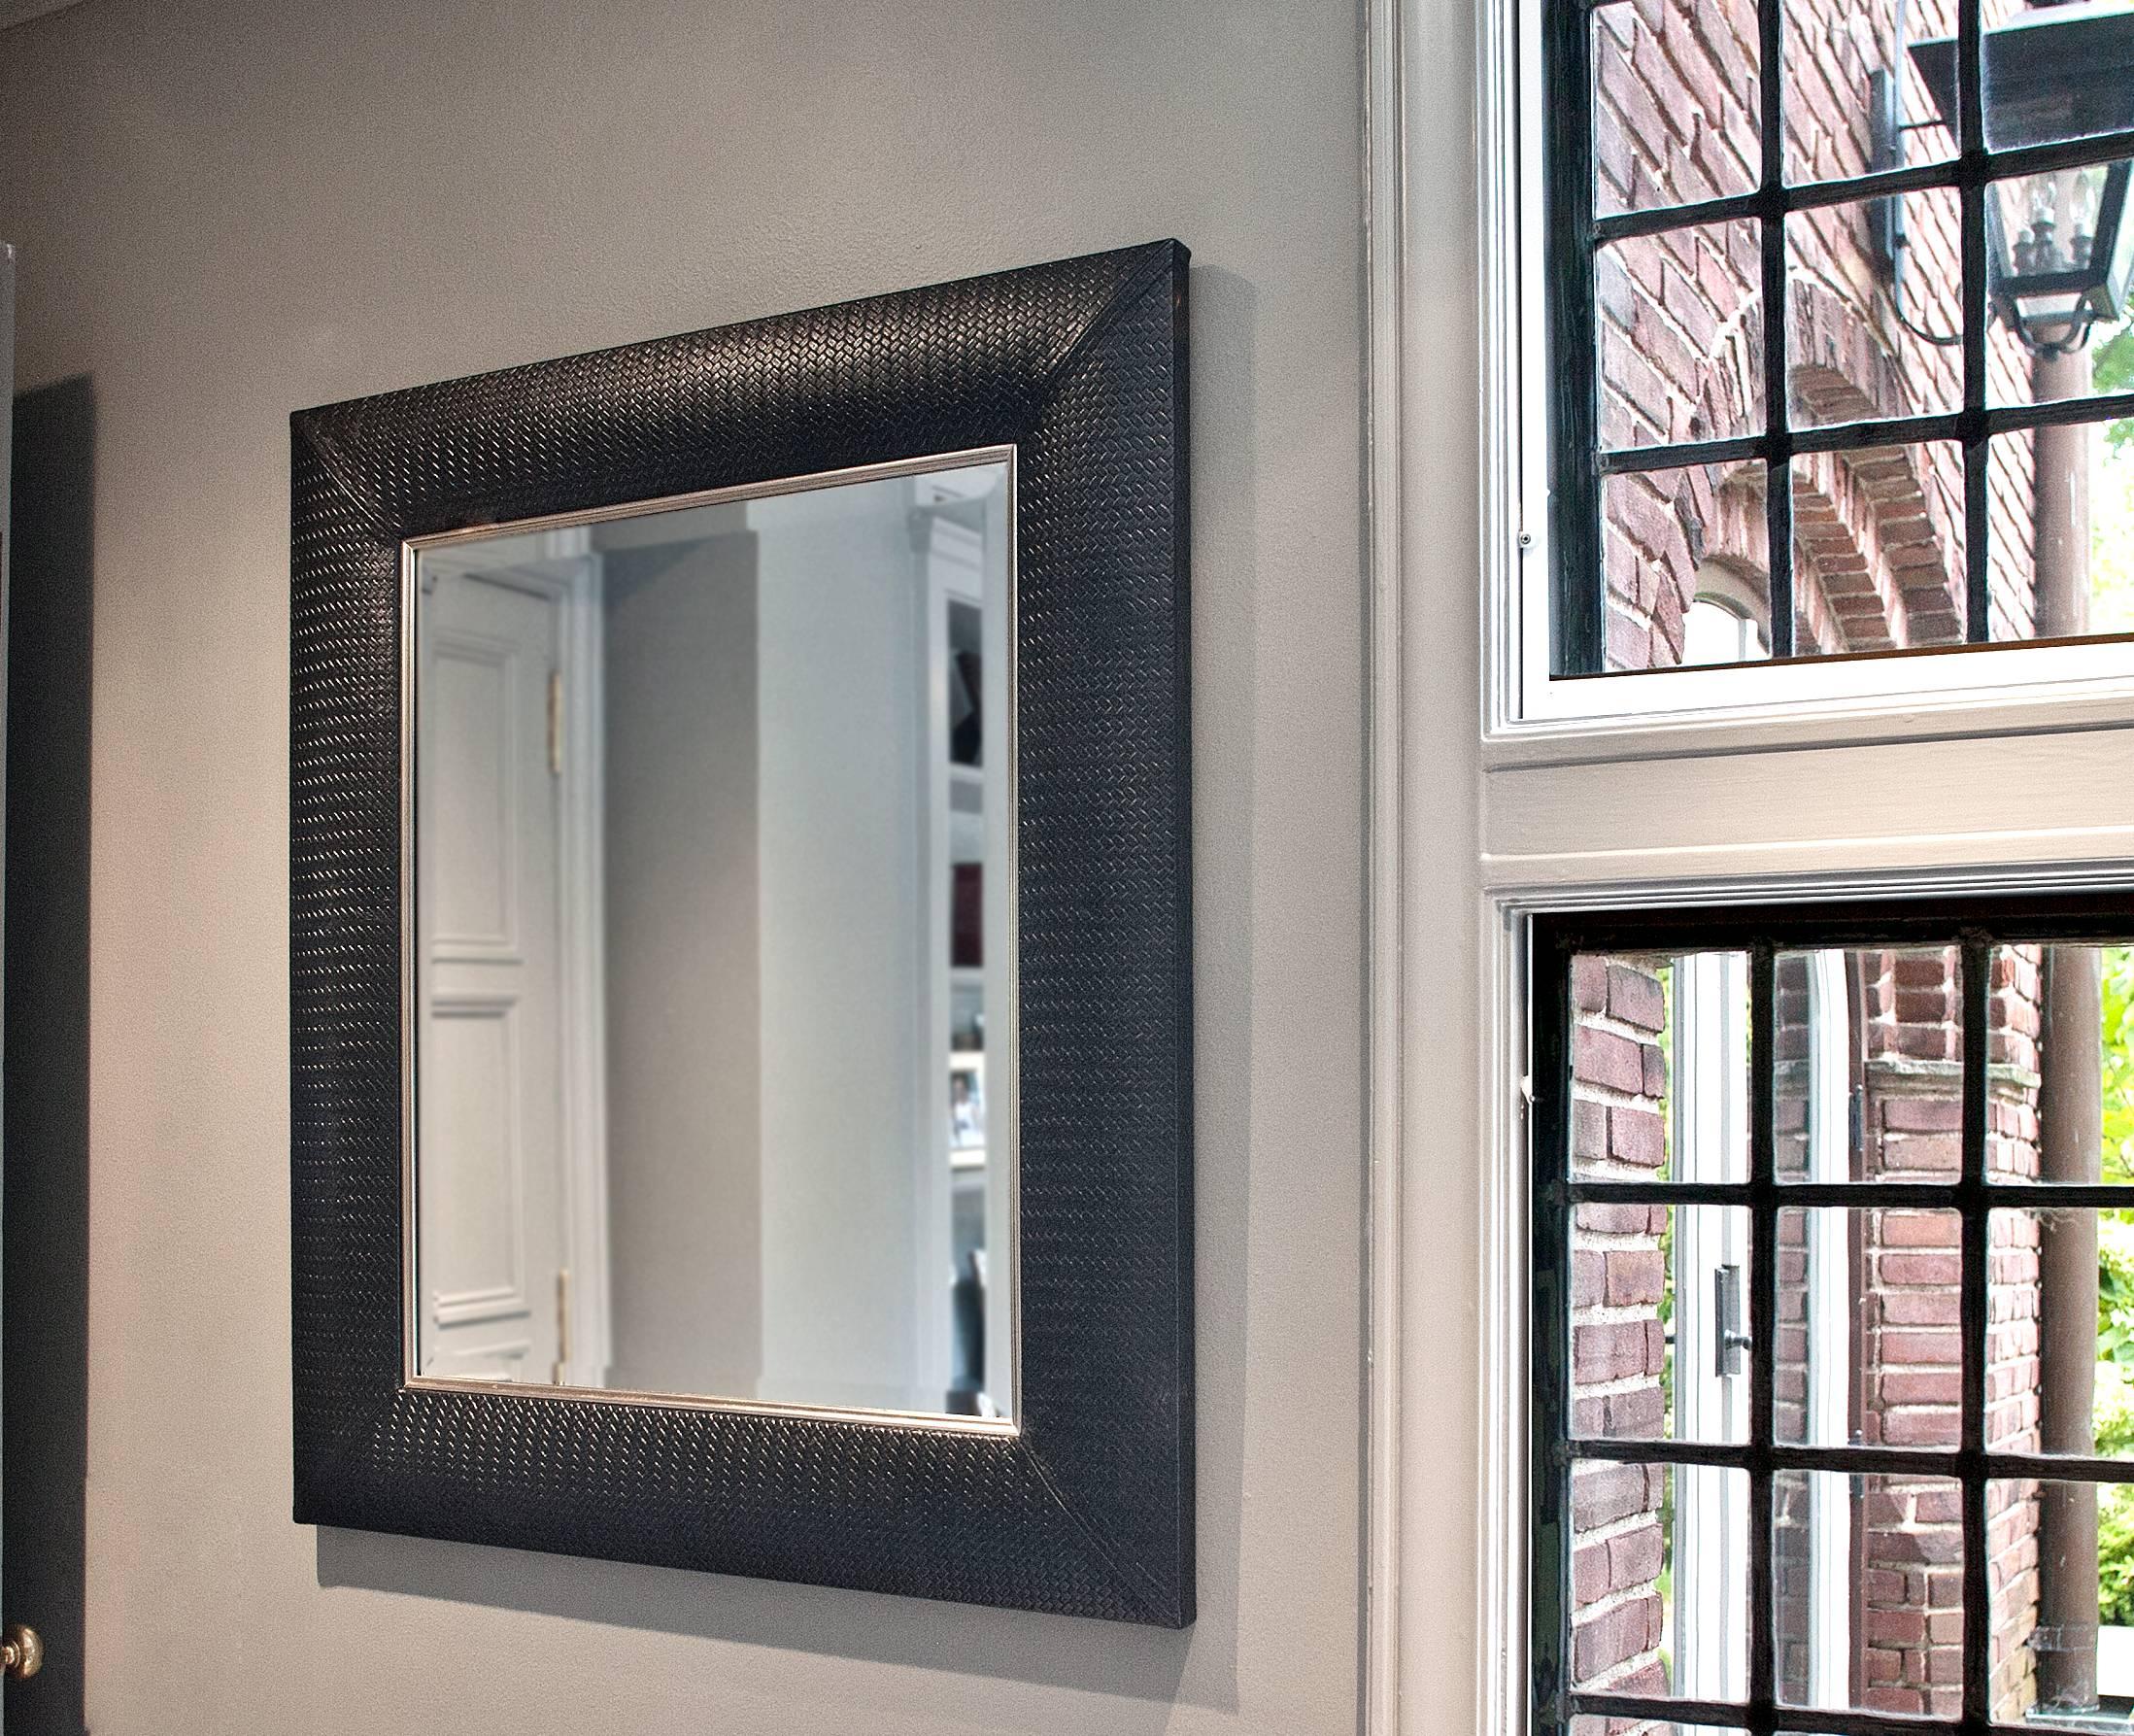 leather frame mirror